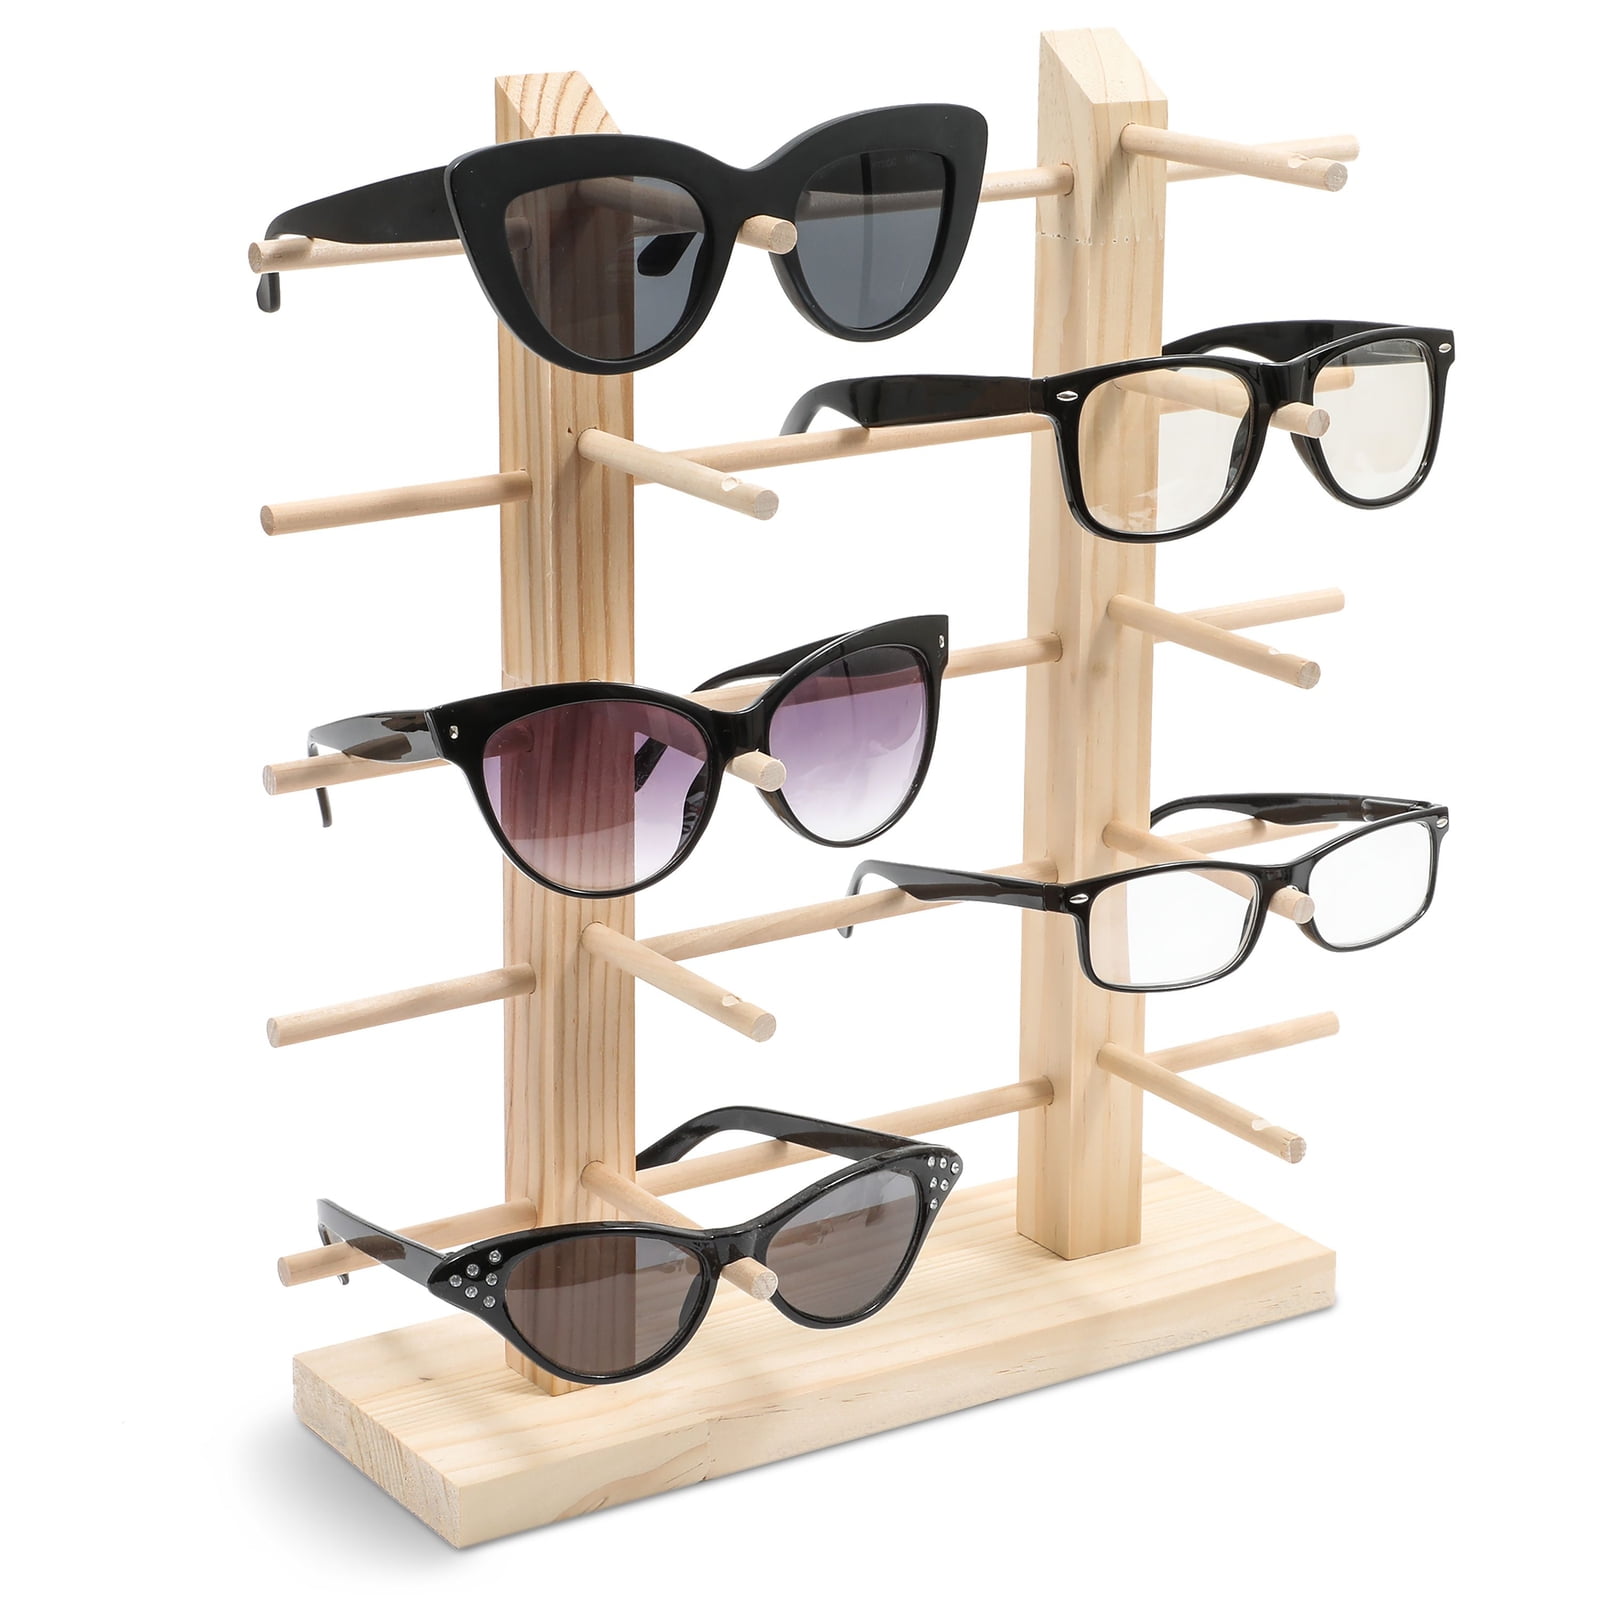 Counter Top Sunglasses Holder Rack Glasses Display Stand Organizer 28-Pair 